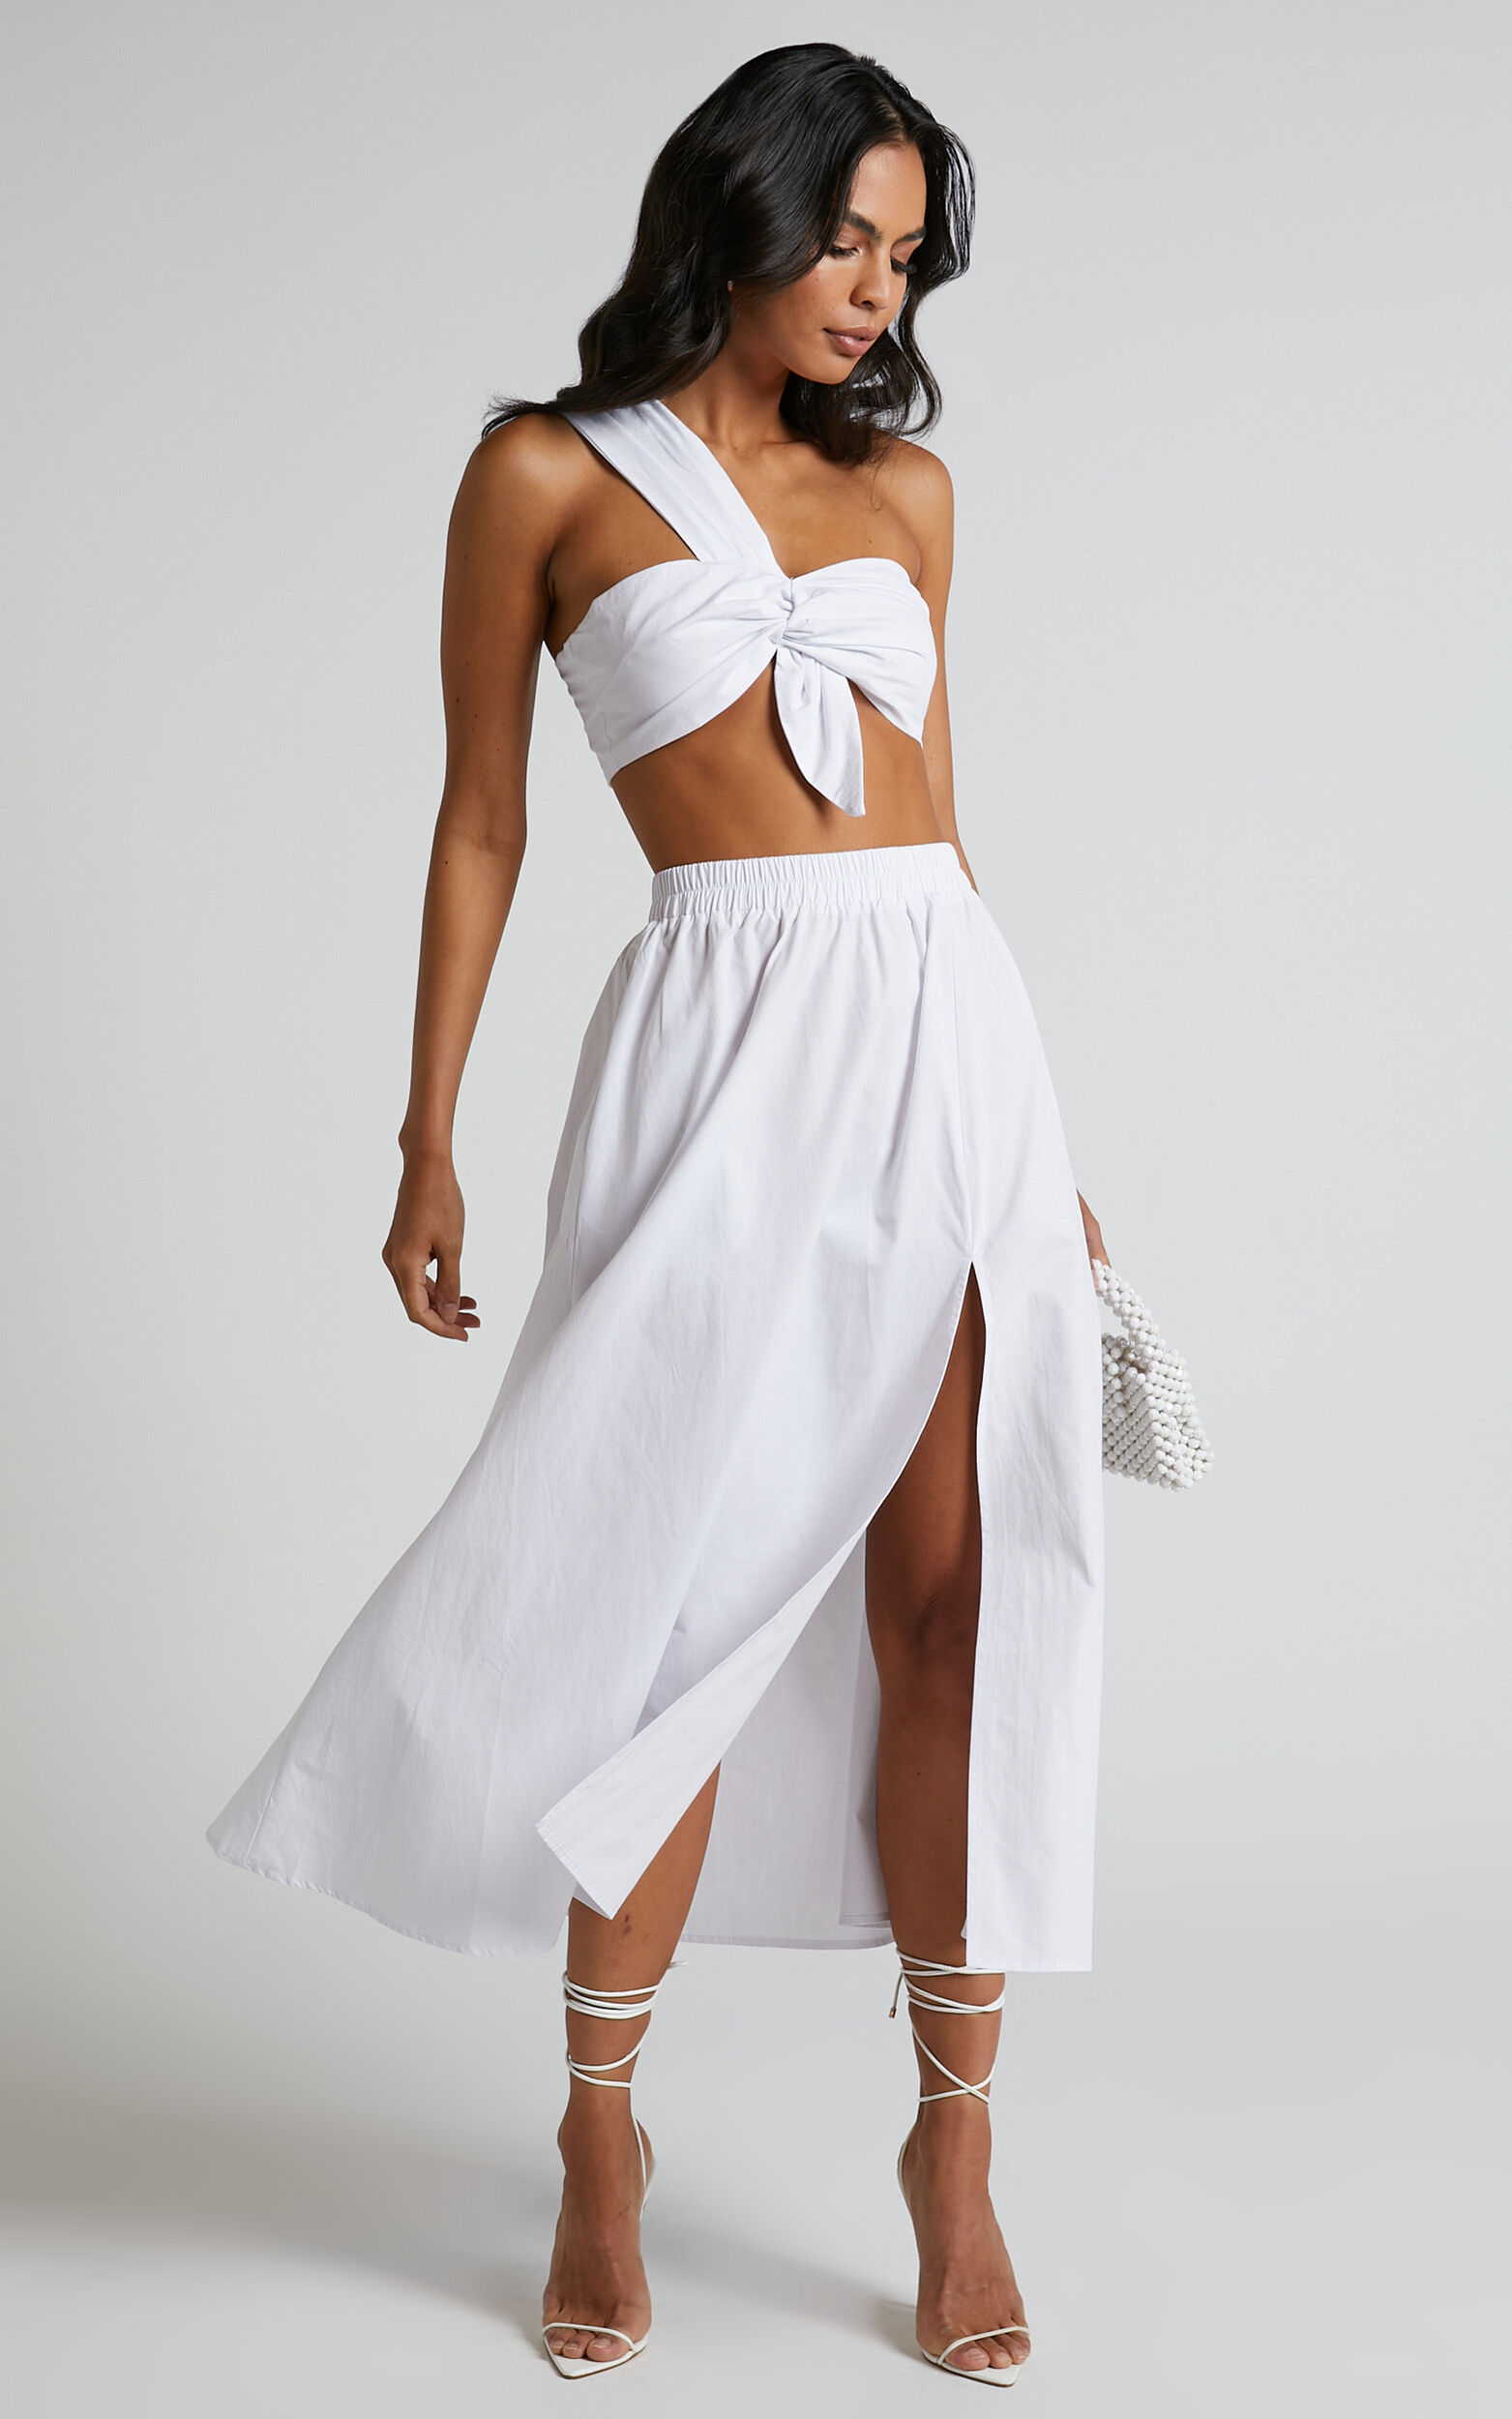 Sula Two Piece Set - One Shoulder Bralette Crop Top and Midaxi Skirt Set in White - 04, WHT1